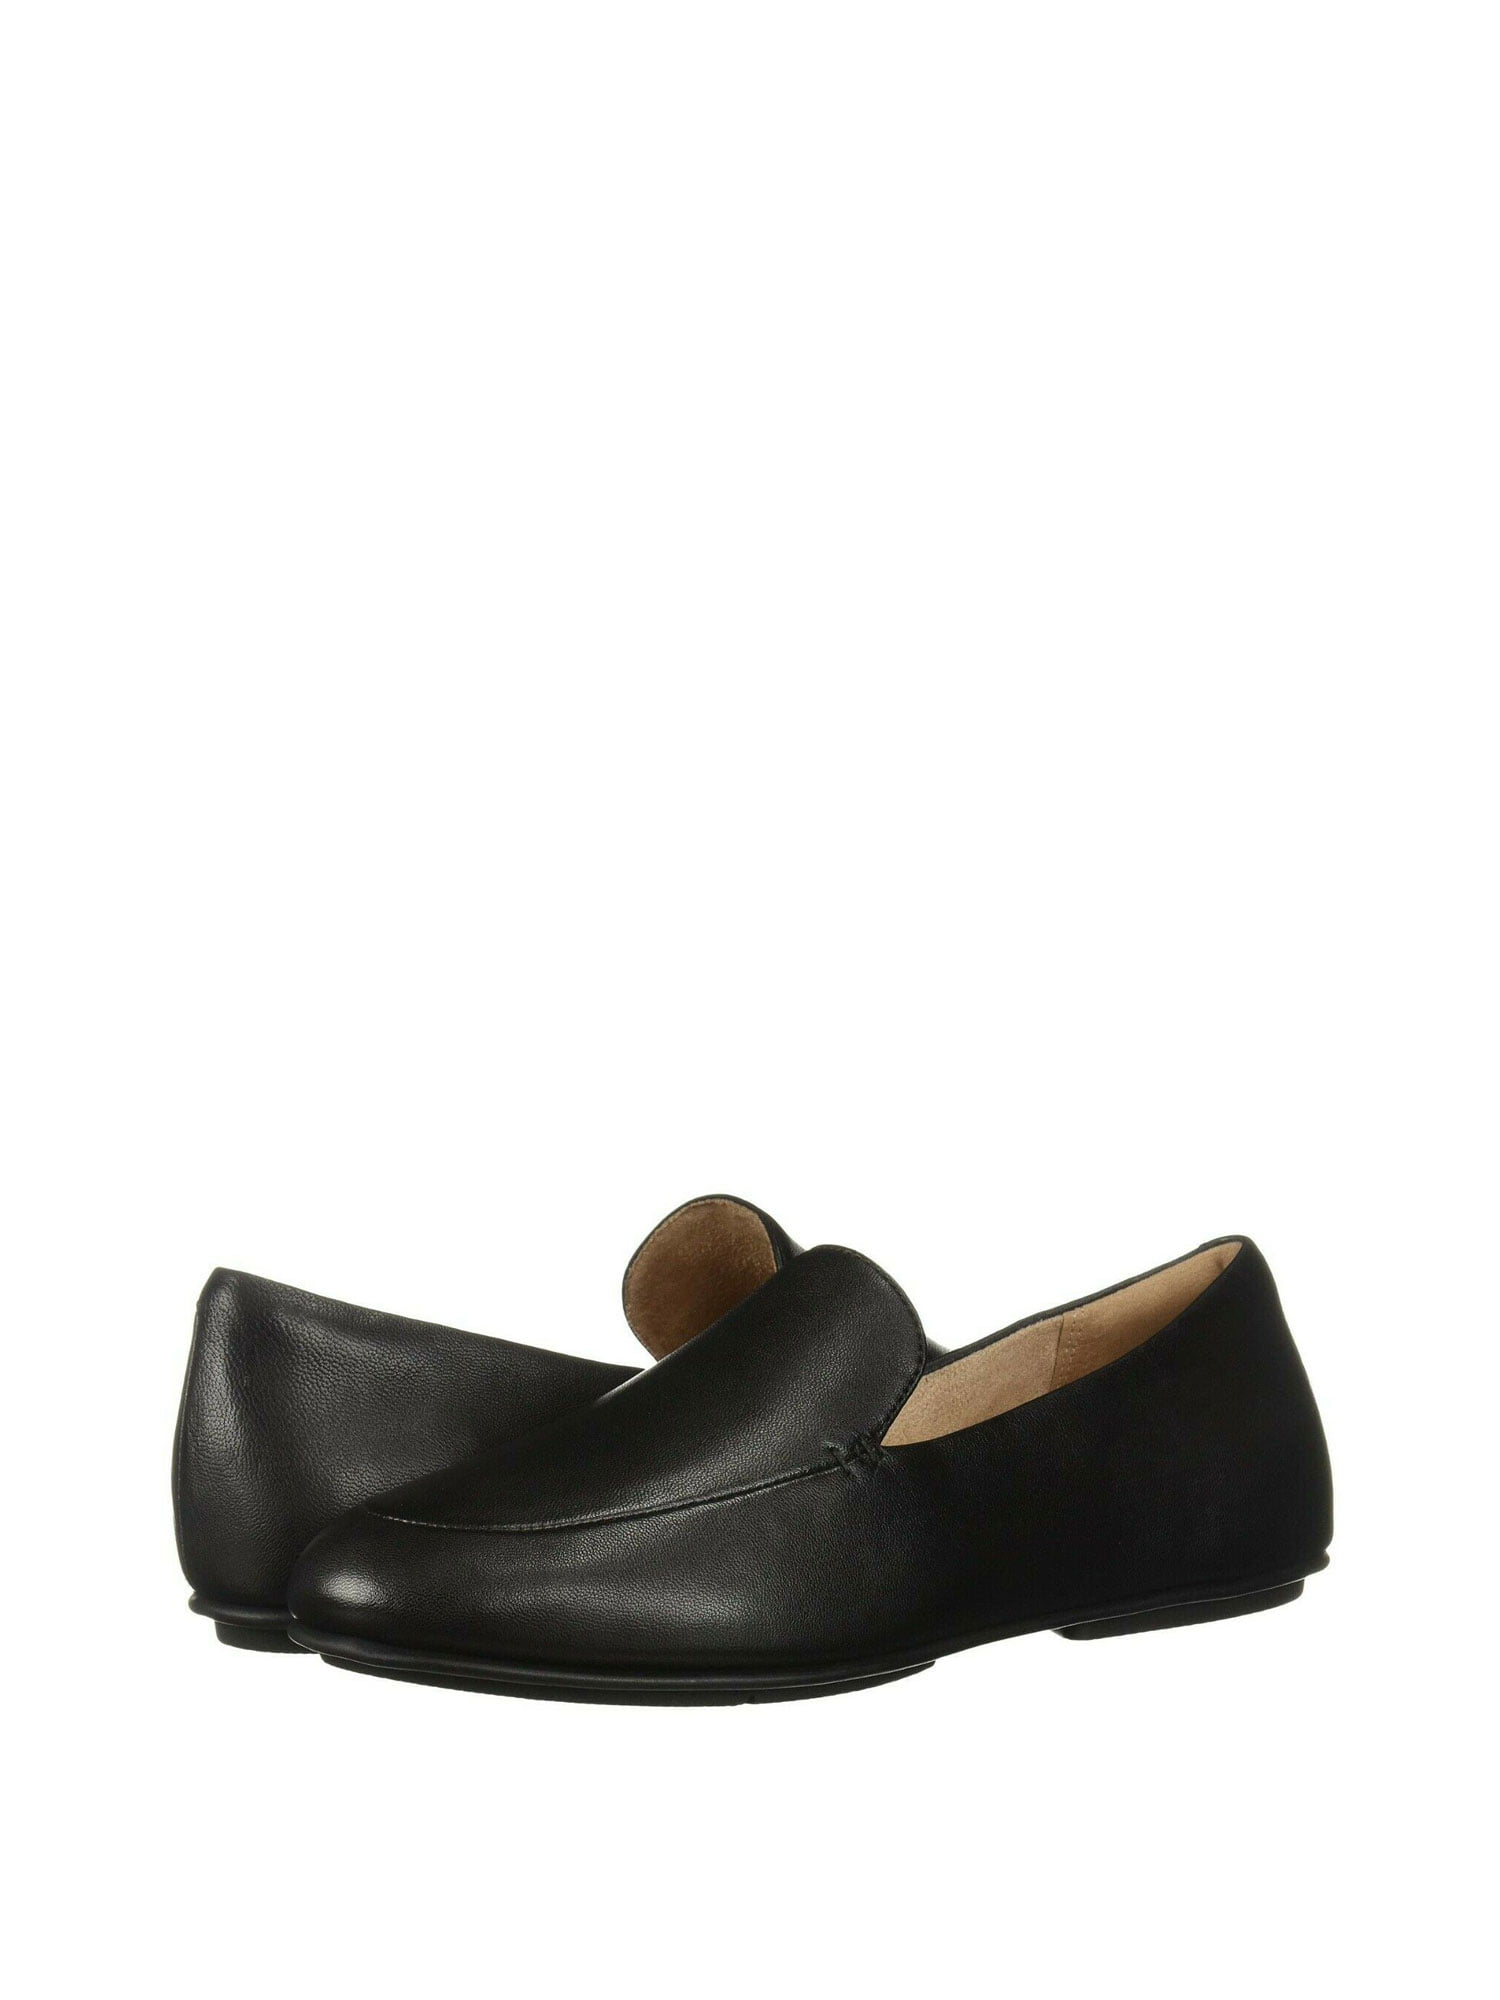 Fitflop Lena Women's Leather Slip On Classic Loafers W44-090 - Walmart.com